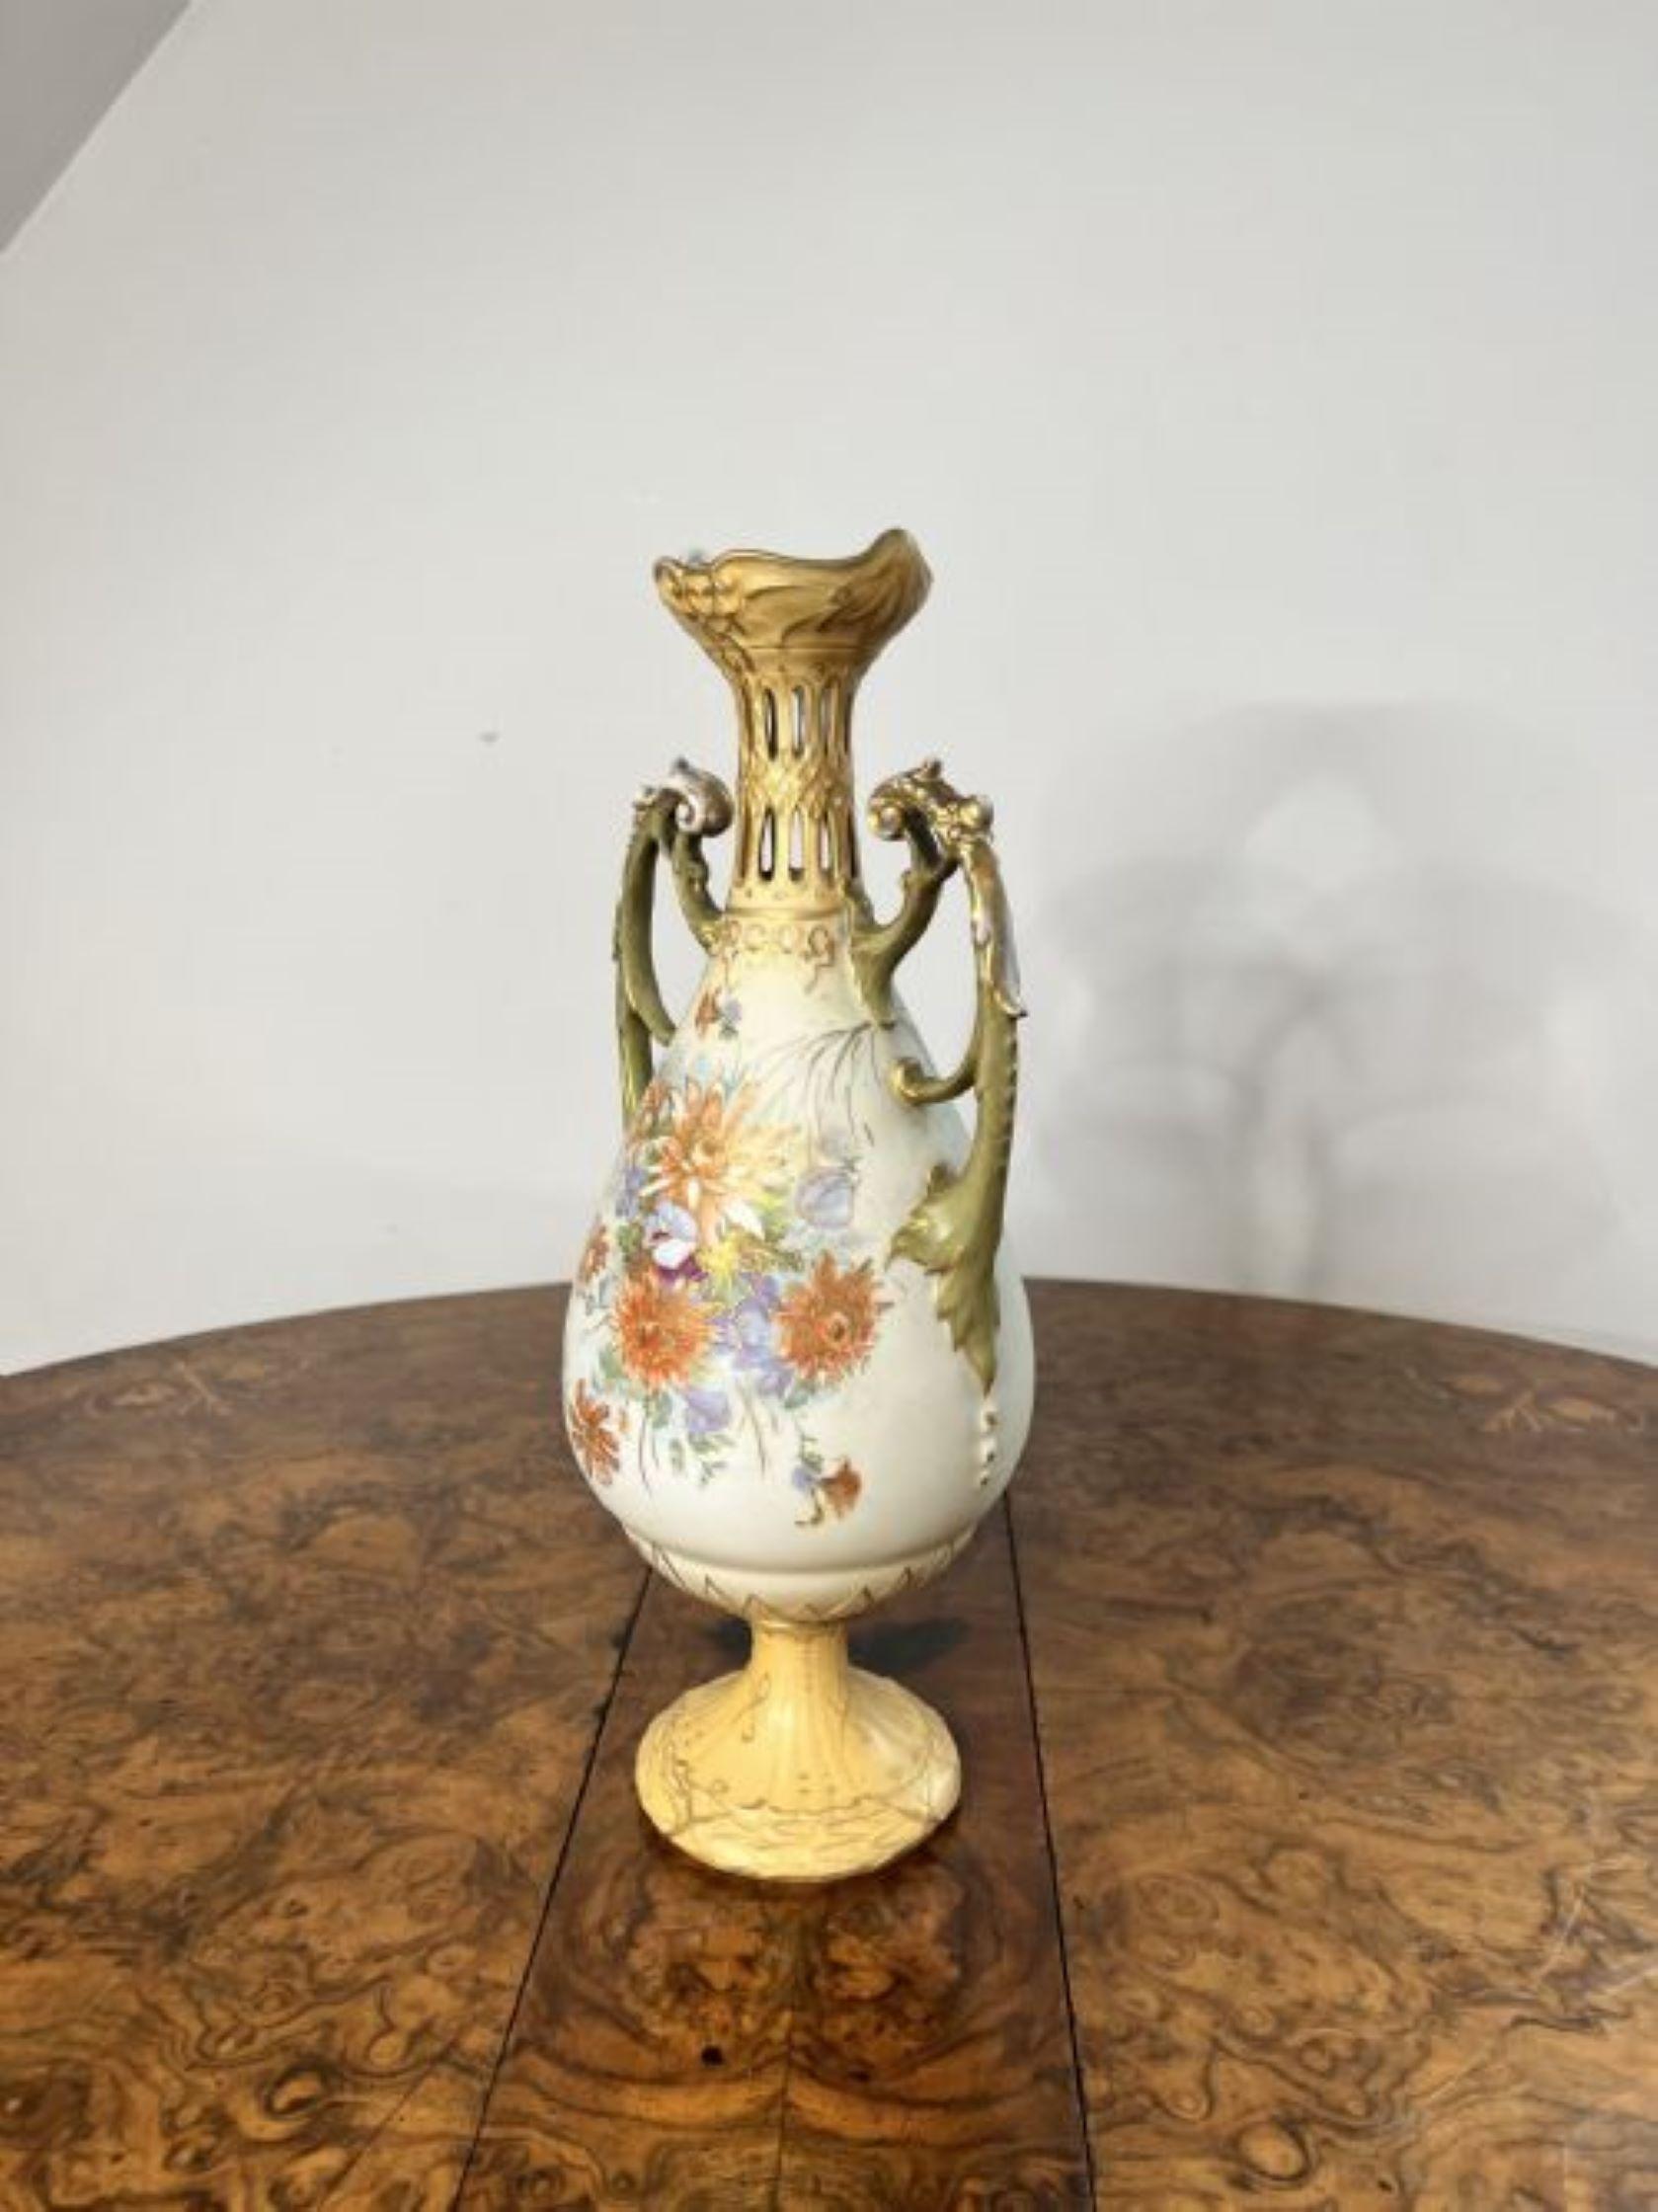 Outstanding quality antique Royal Vienna centrepiece and side vases, comprising of two vases with pierced necks and the centrepiece having a pierced base, gold gilded twin shaped handles to the sides, decorated with flowers in stunning green,